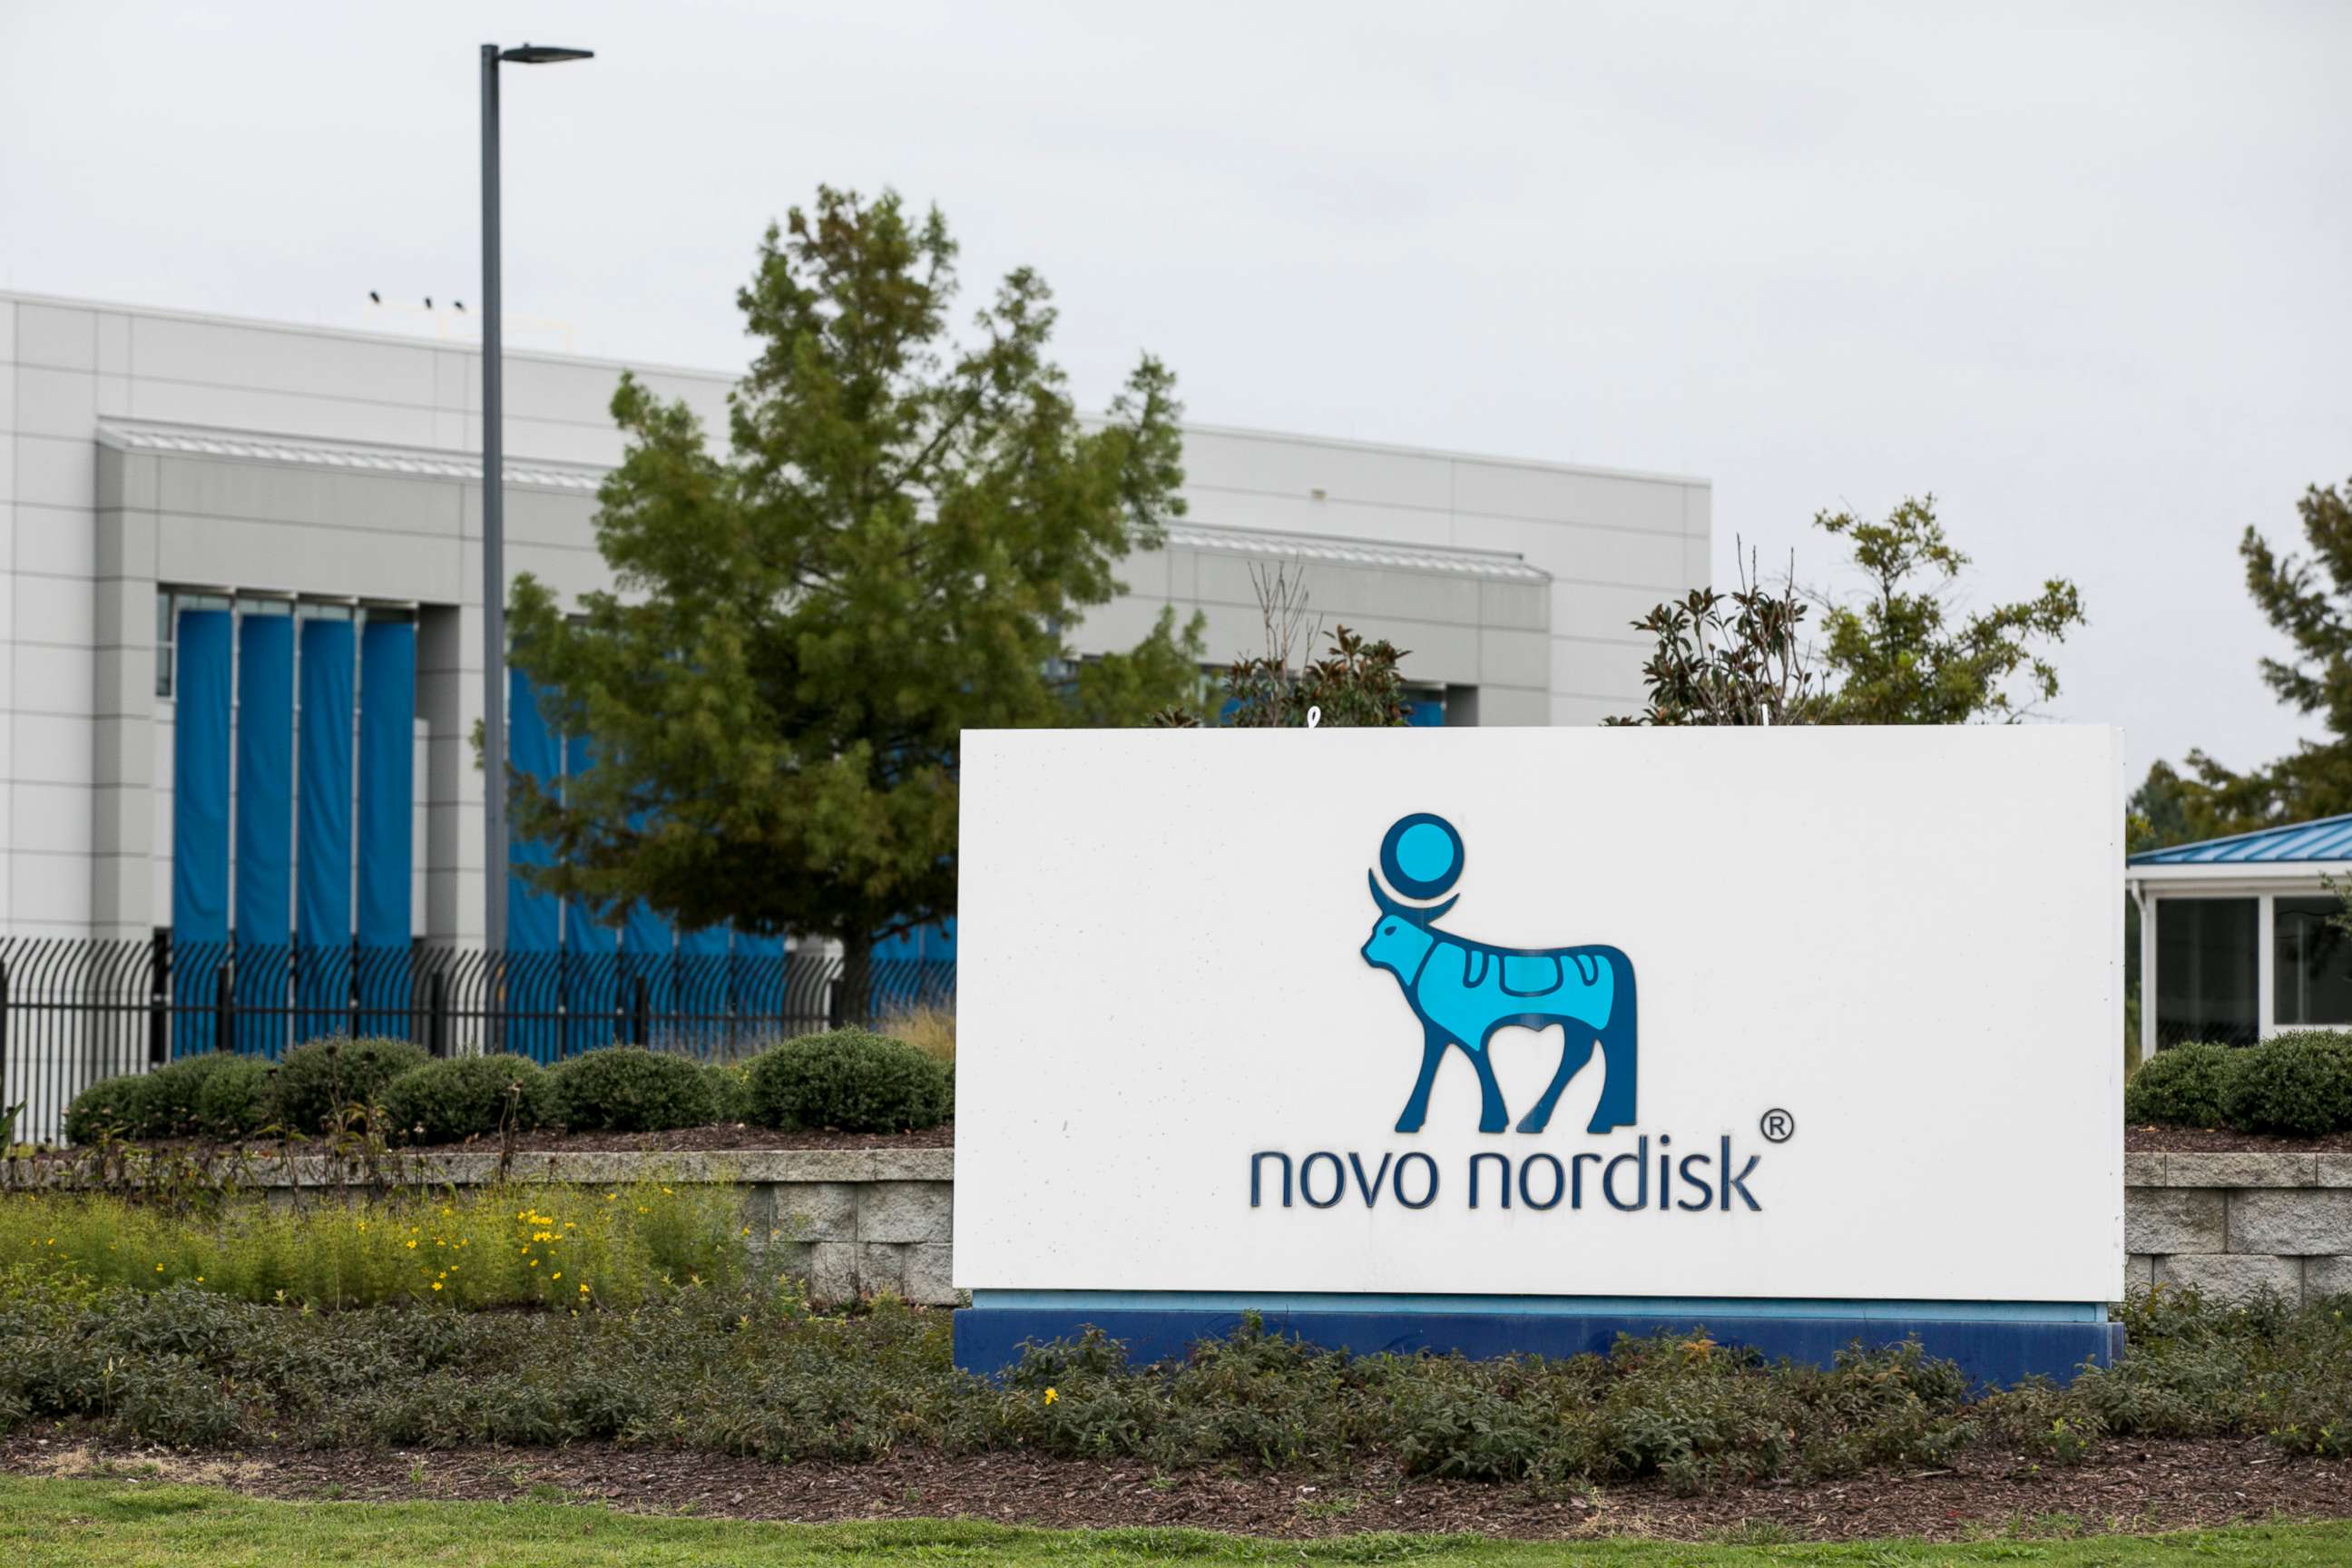 PHOTO: In this Sept. 14, 2019, file photo, a sign is shown outside of a Novo Nordisk facility in Clayton, N.C.